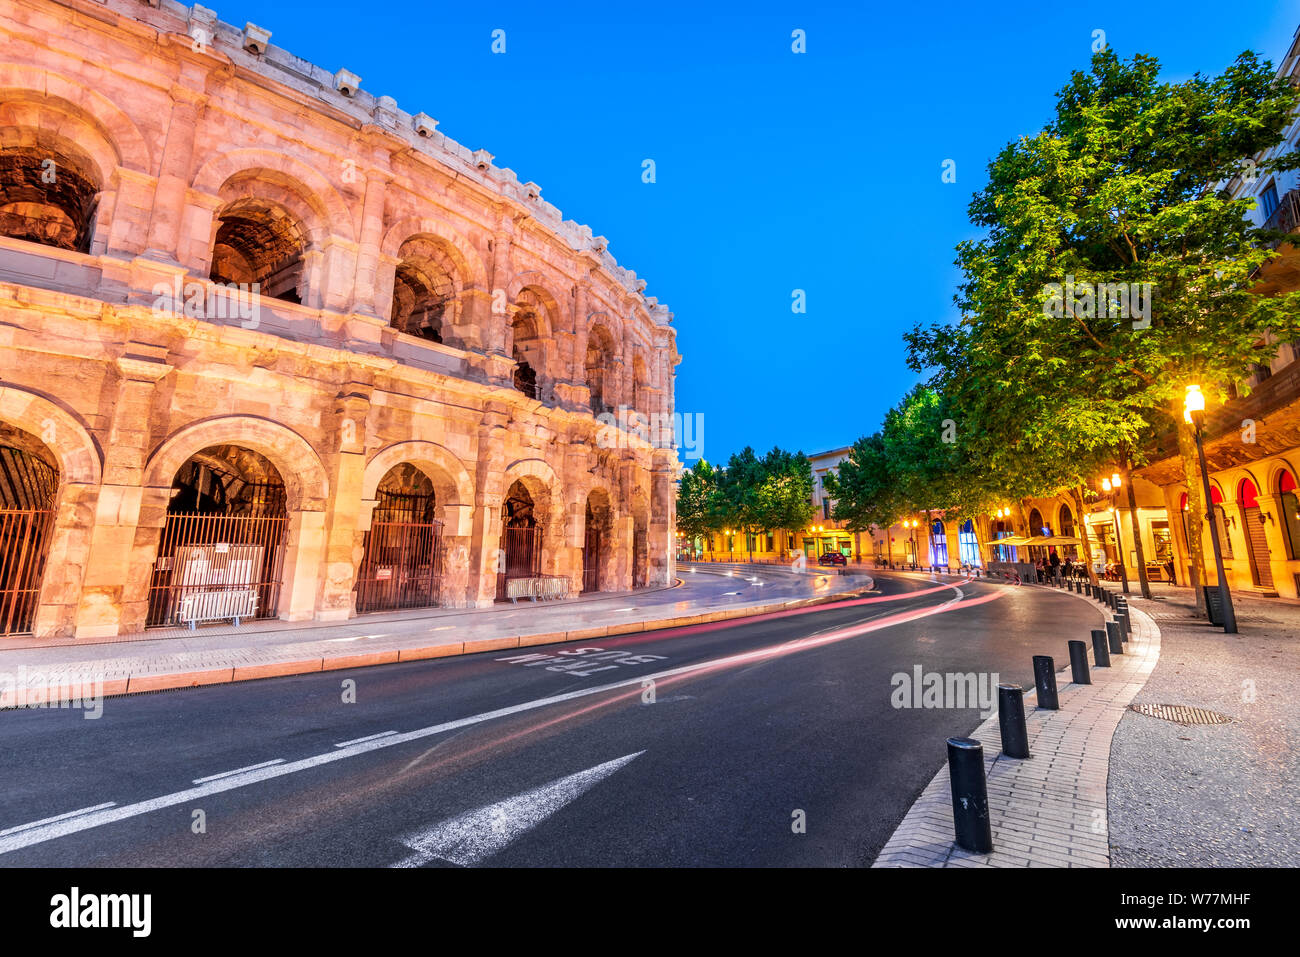 Nimes, France. Ancient Roman amphitheatre in the Occitanie region of southern France. Stock Photo